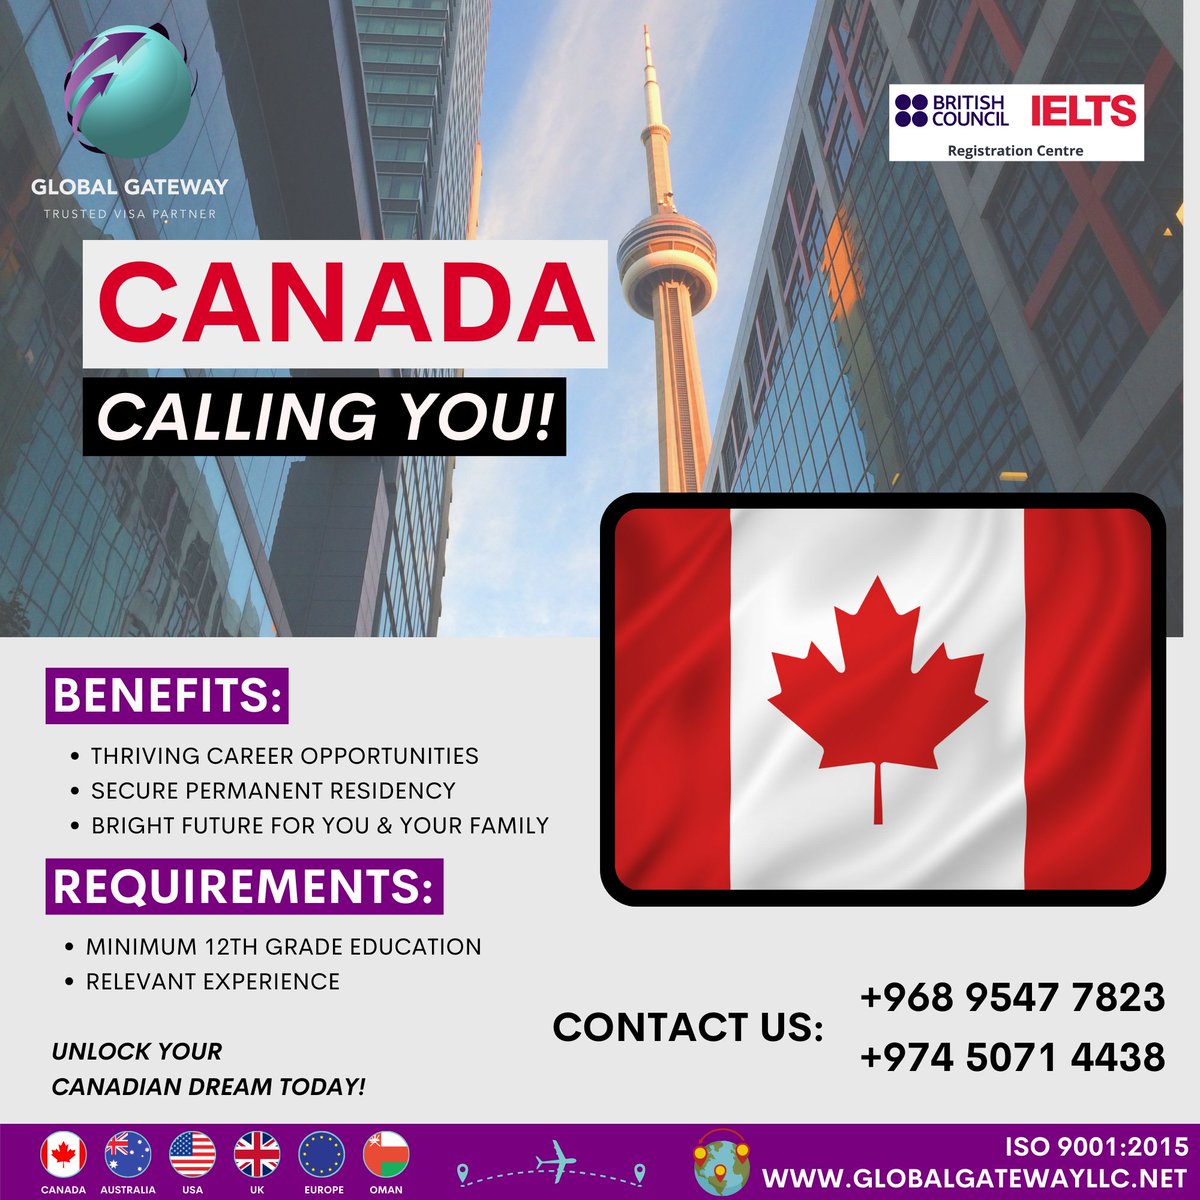 Your Pathway to Canada: Thriving Career Opportunities and Permanent Residency Awaits! Unlock Your Canadian Dream Today!

𝑨𝒑𝒑𝒍𝒚 𝑵𝒐𝒘! 📦💼
info@globalgatewayllc.net

#GlobalGateway #greneda #tech #Ontario #Healthcare #Engineers #WorkVisa #success #LMIA #PNP #AIP #investment